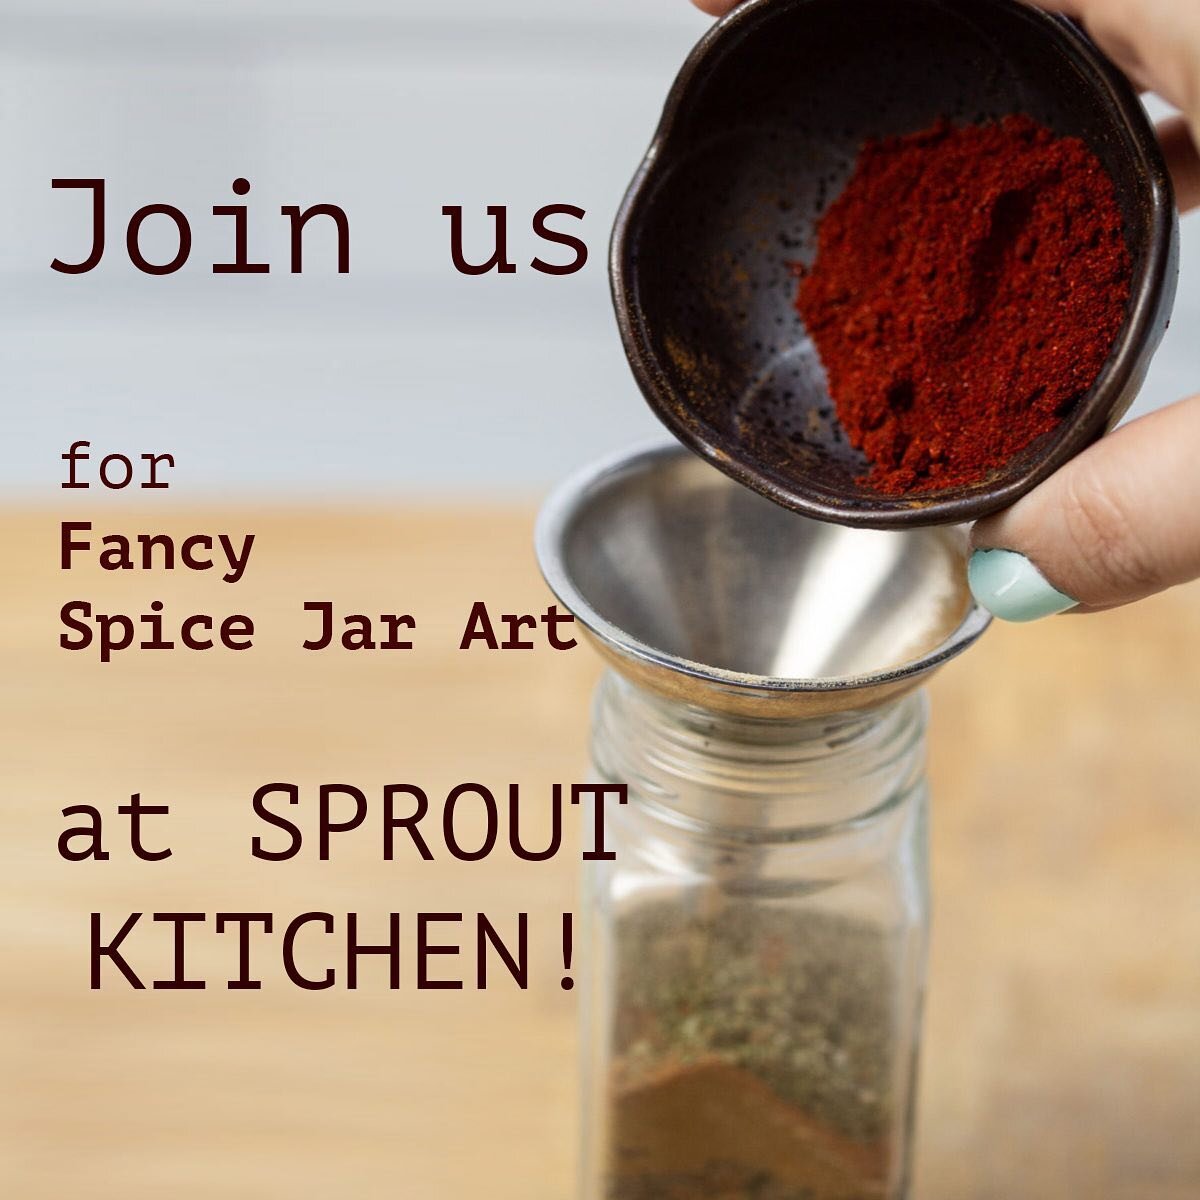 Workshops are filling up fast, we&rsquo;ve still got a few spots for next weeks class. Get in touch today for Spice Jar Art with Chelsea.  Class is at 6:00 pm at Sprout on Wednesday, January the 18th. Get ready to add some fun to your evening and fla